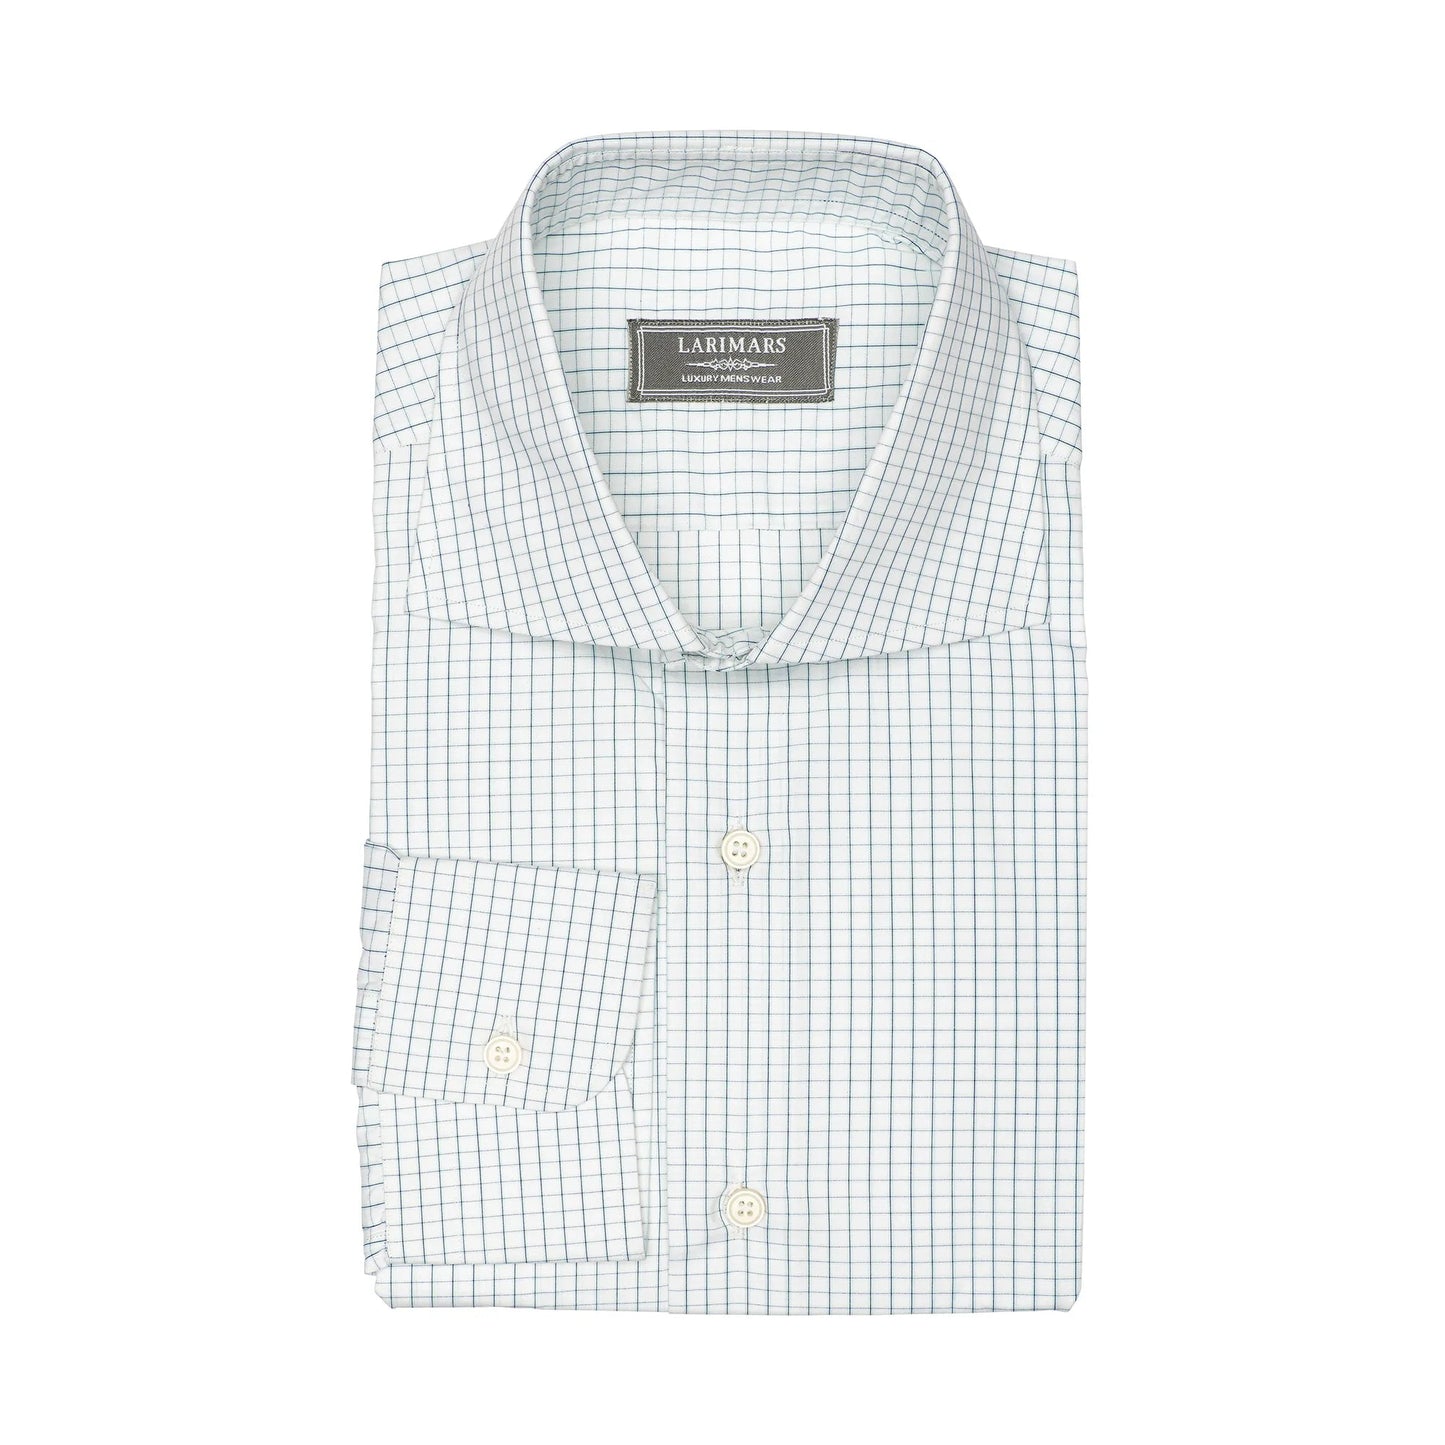 Green & White Check - Larimars Clothing Men's Formal and casual wear shirts